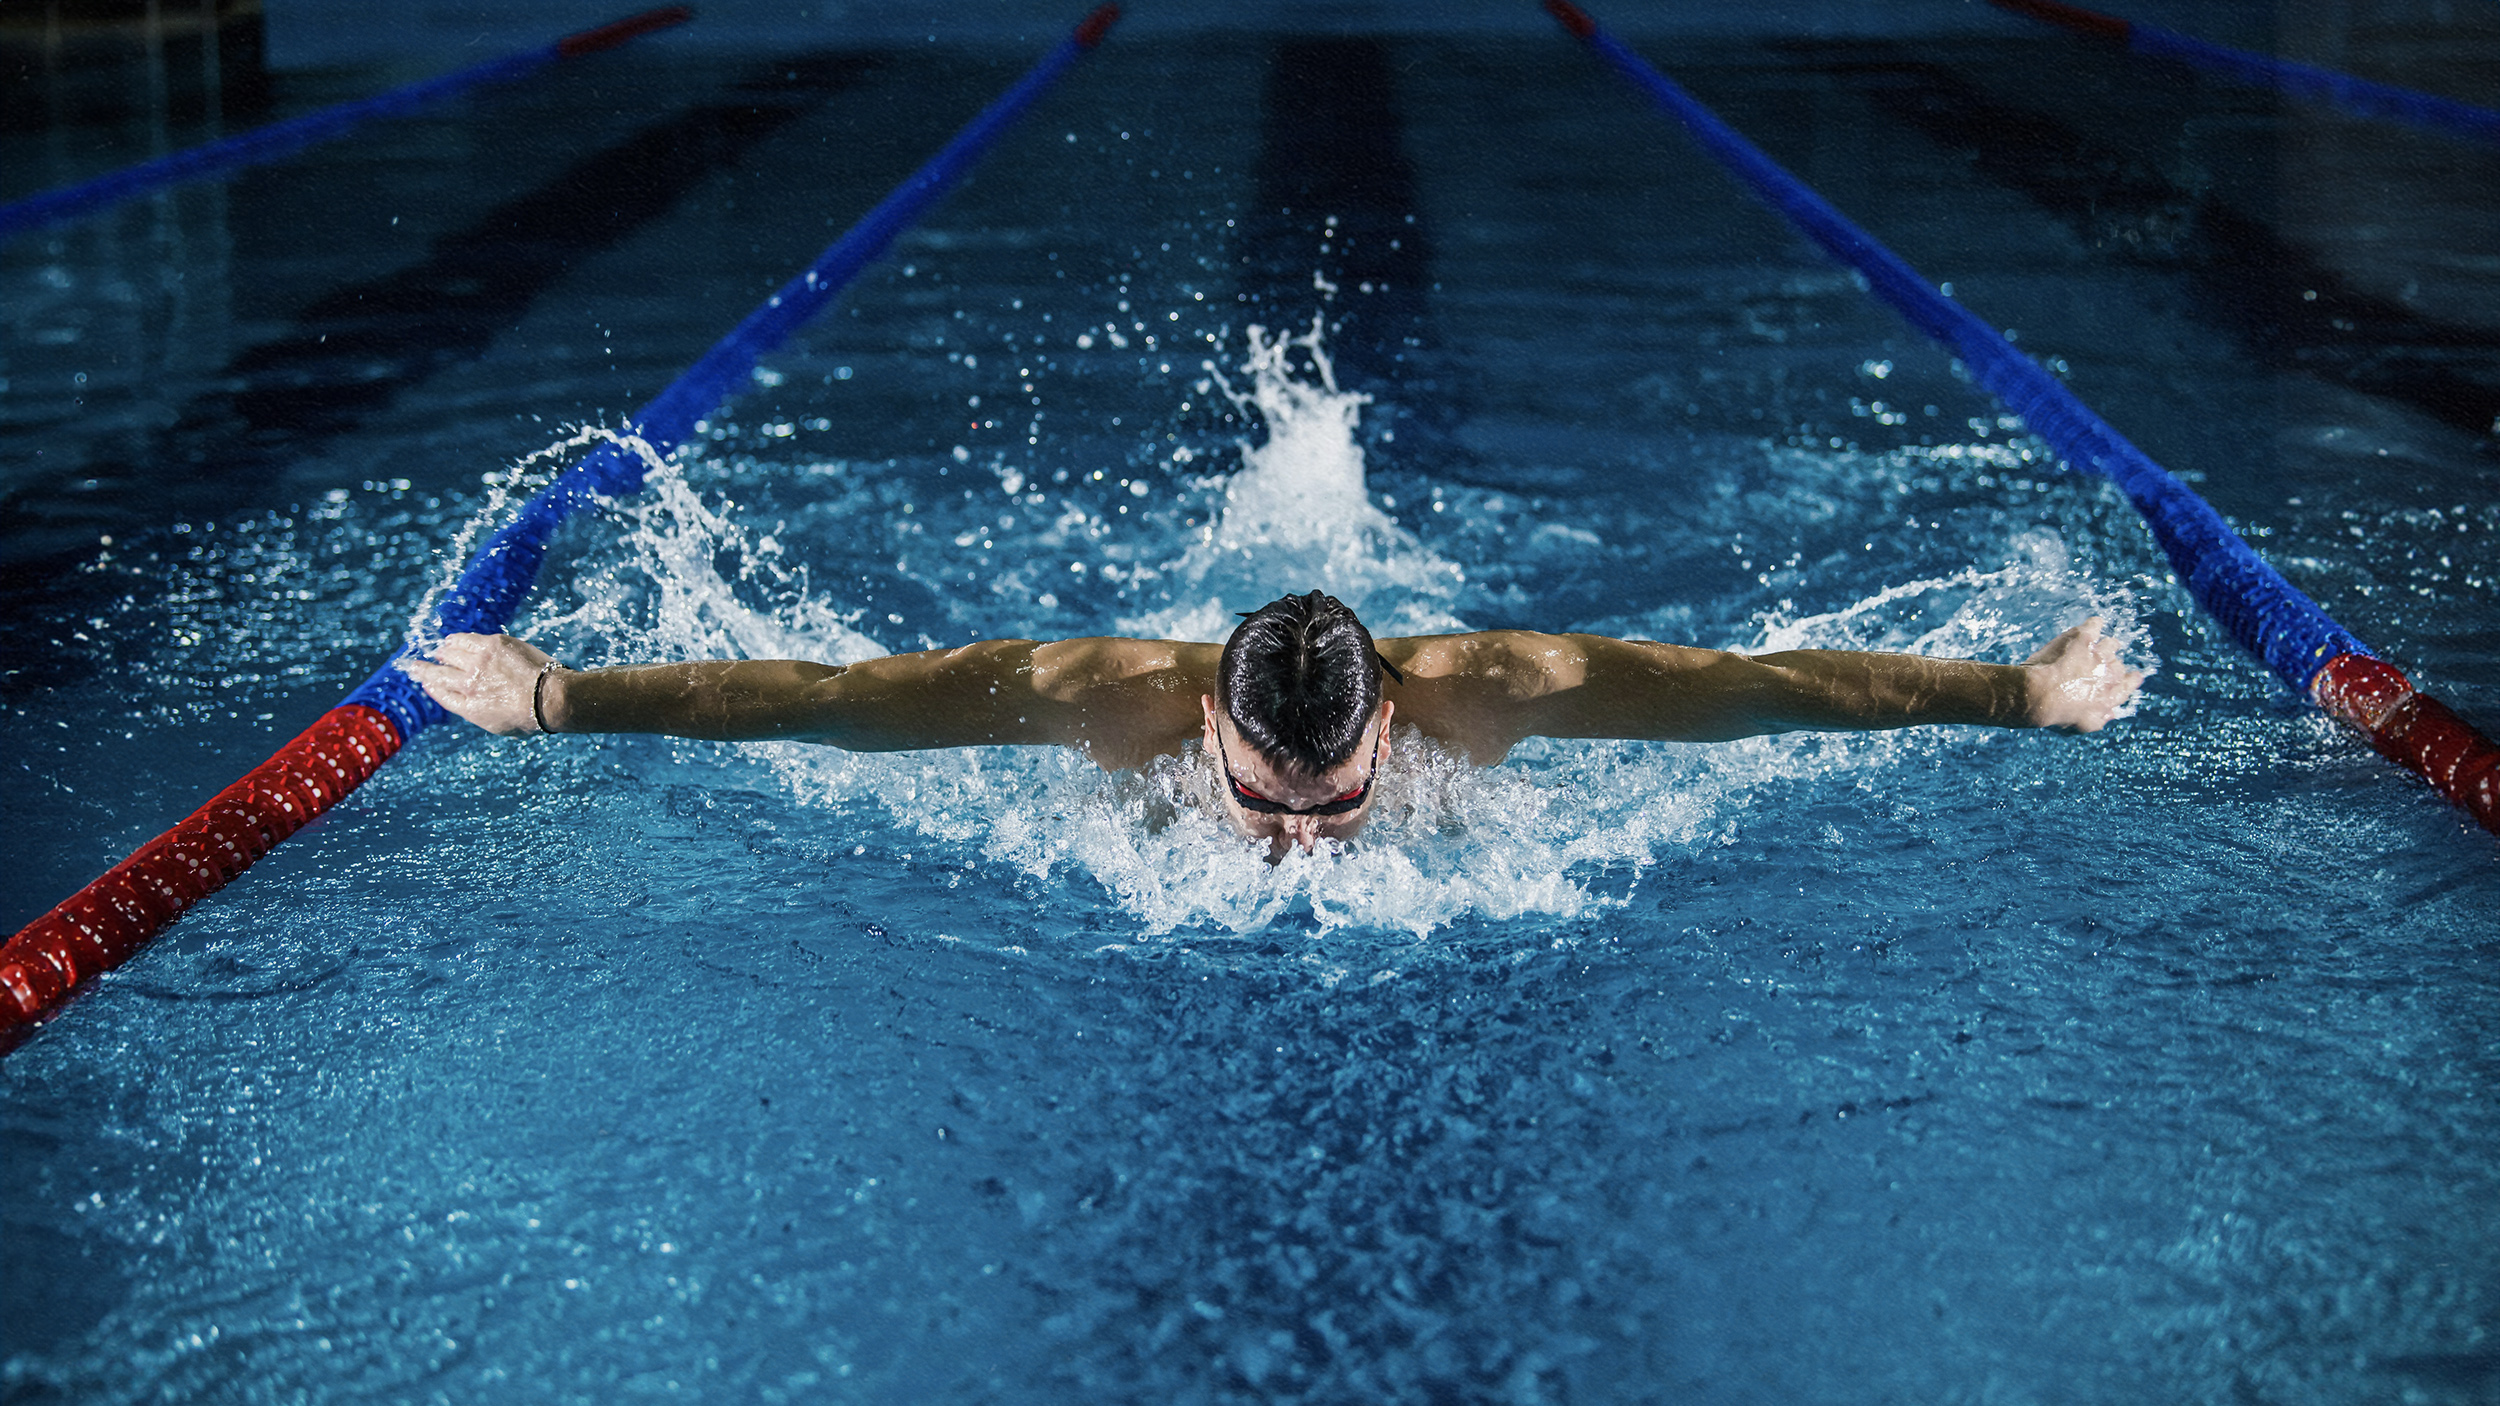 A swimmer is utilizing psychology for success while swimming in a pool at night.